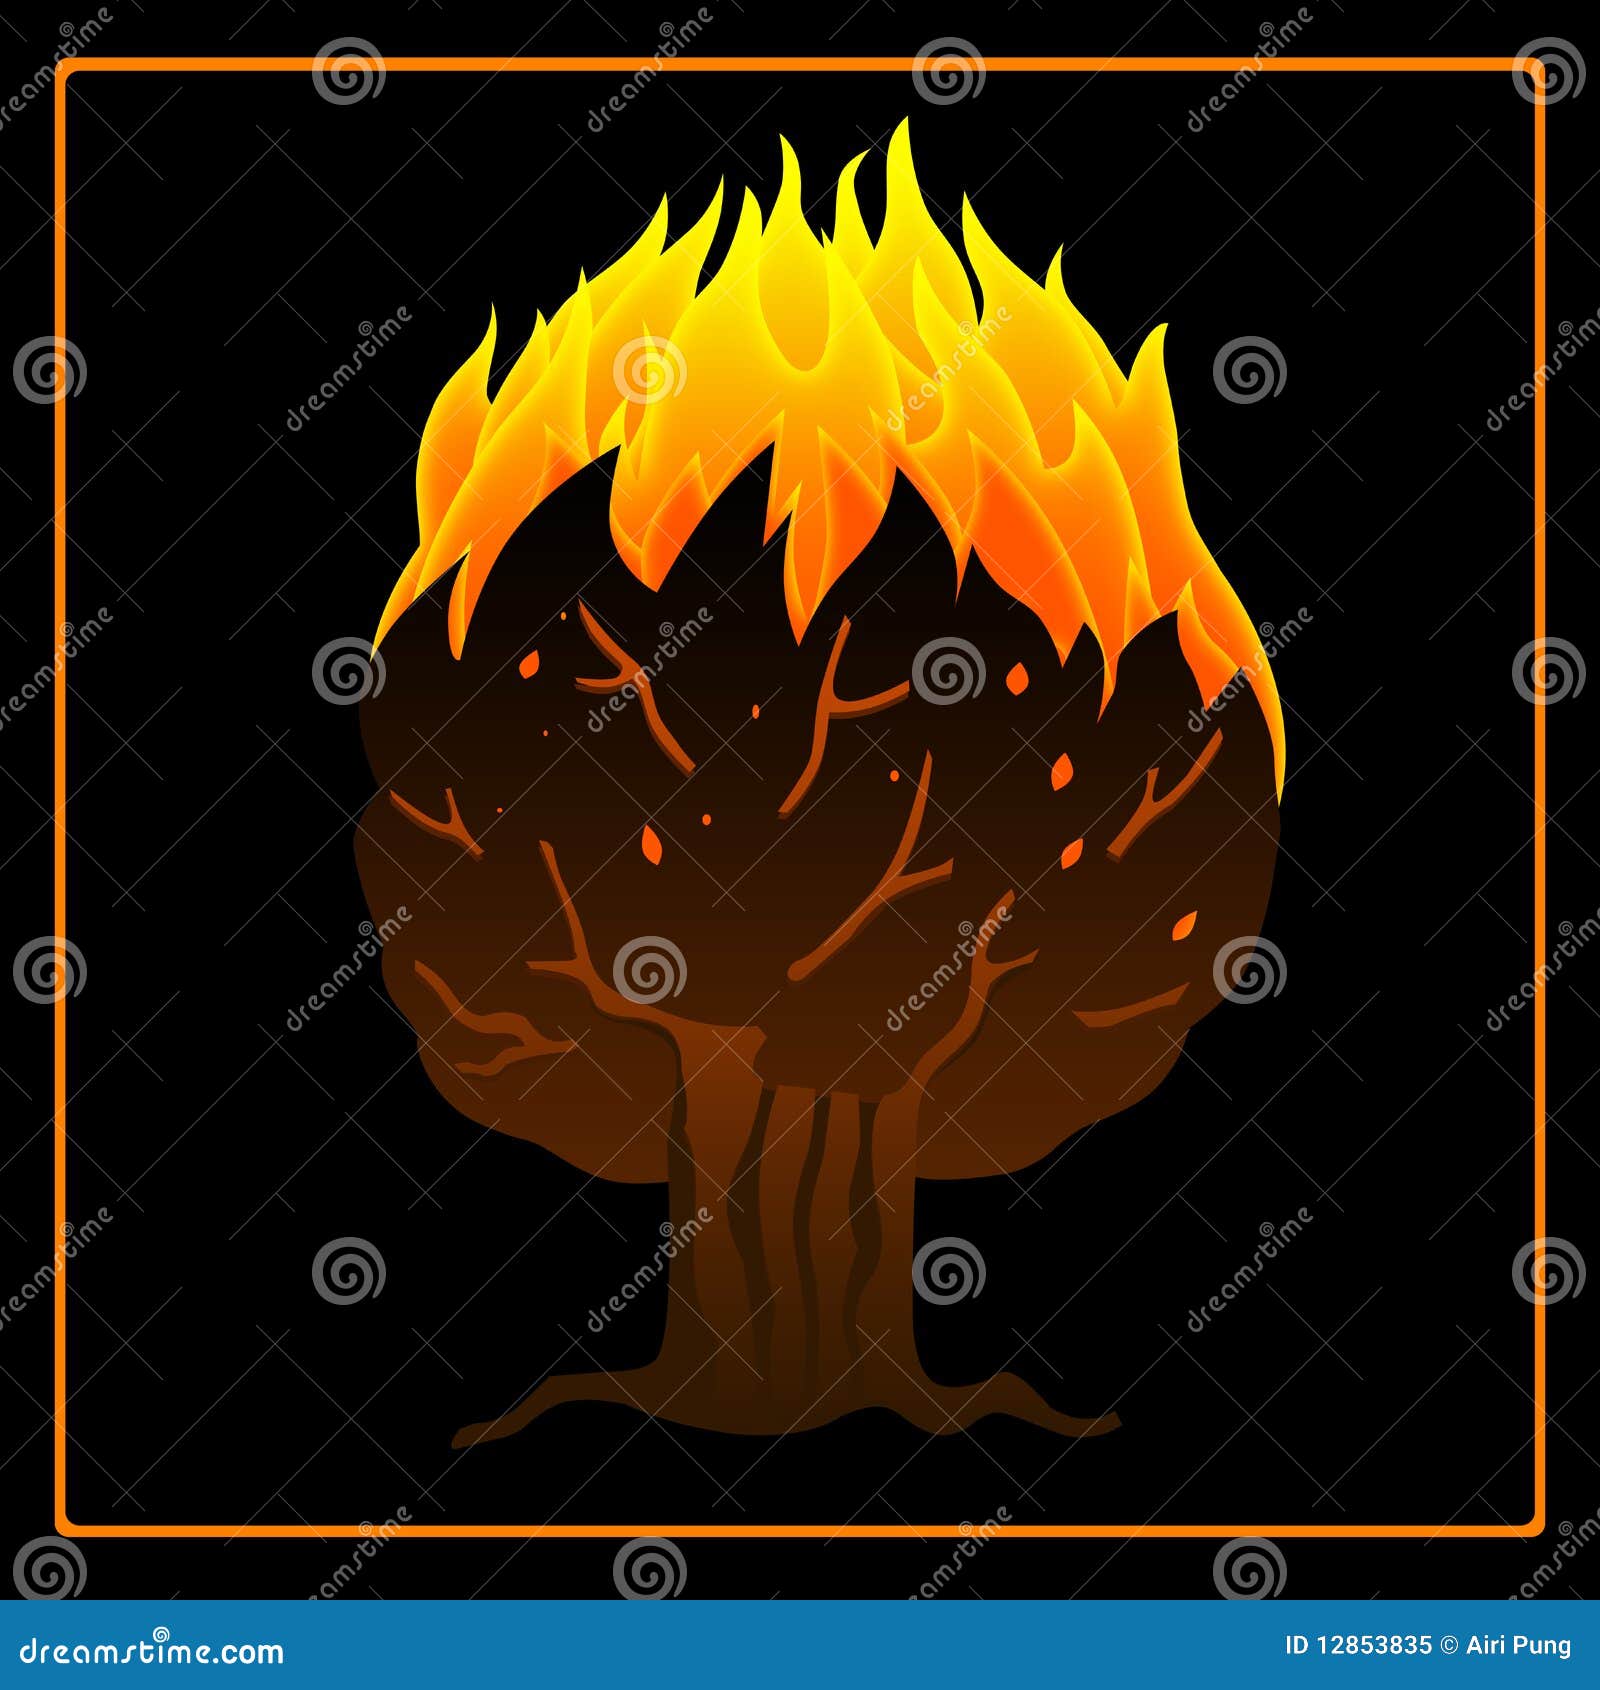 Tree on fire icon. Tree on fire artistic vector icon on the black background.. Can be used in a wide range of concepts.